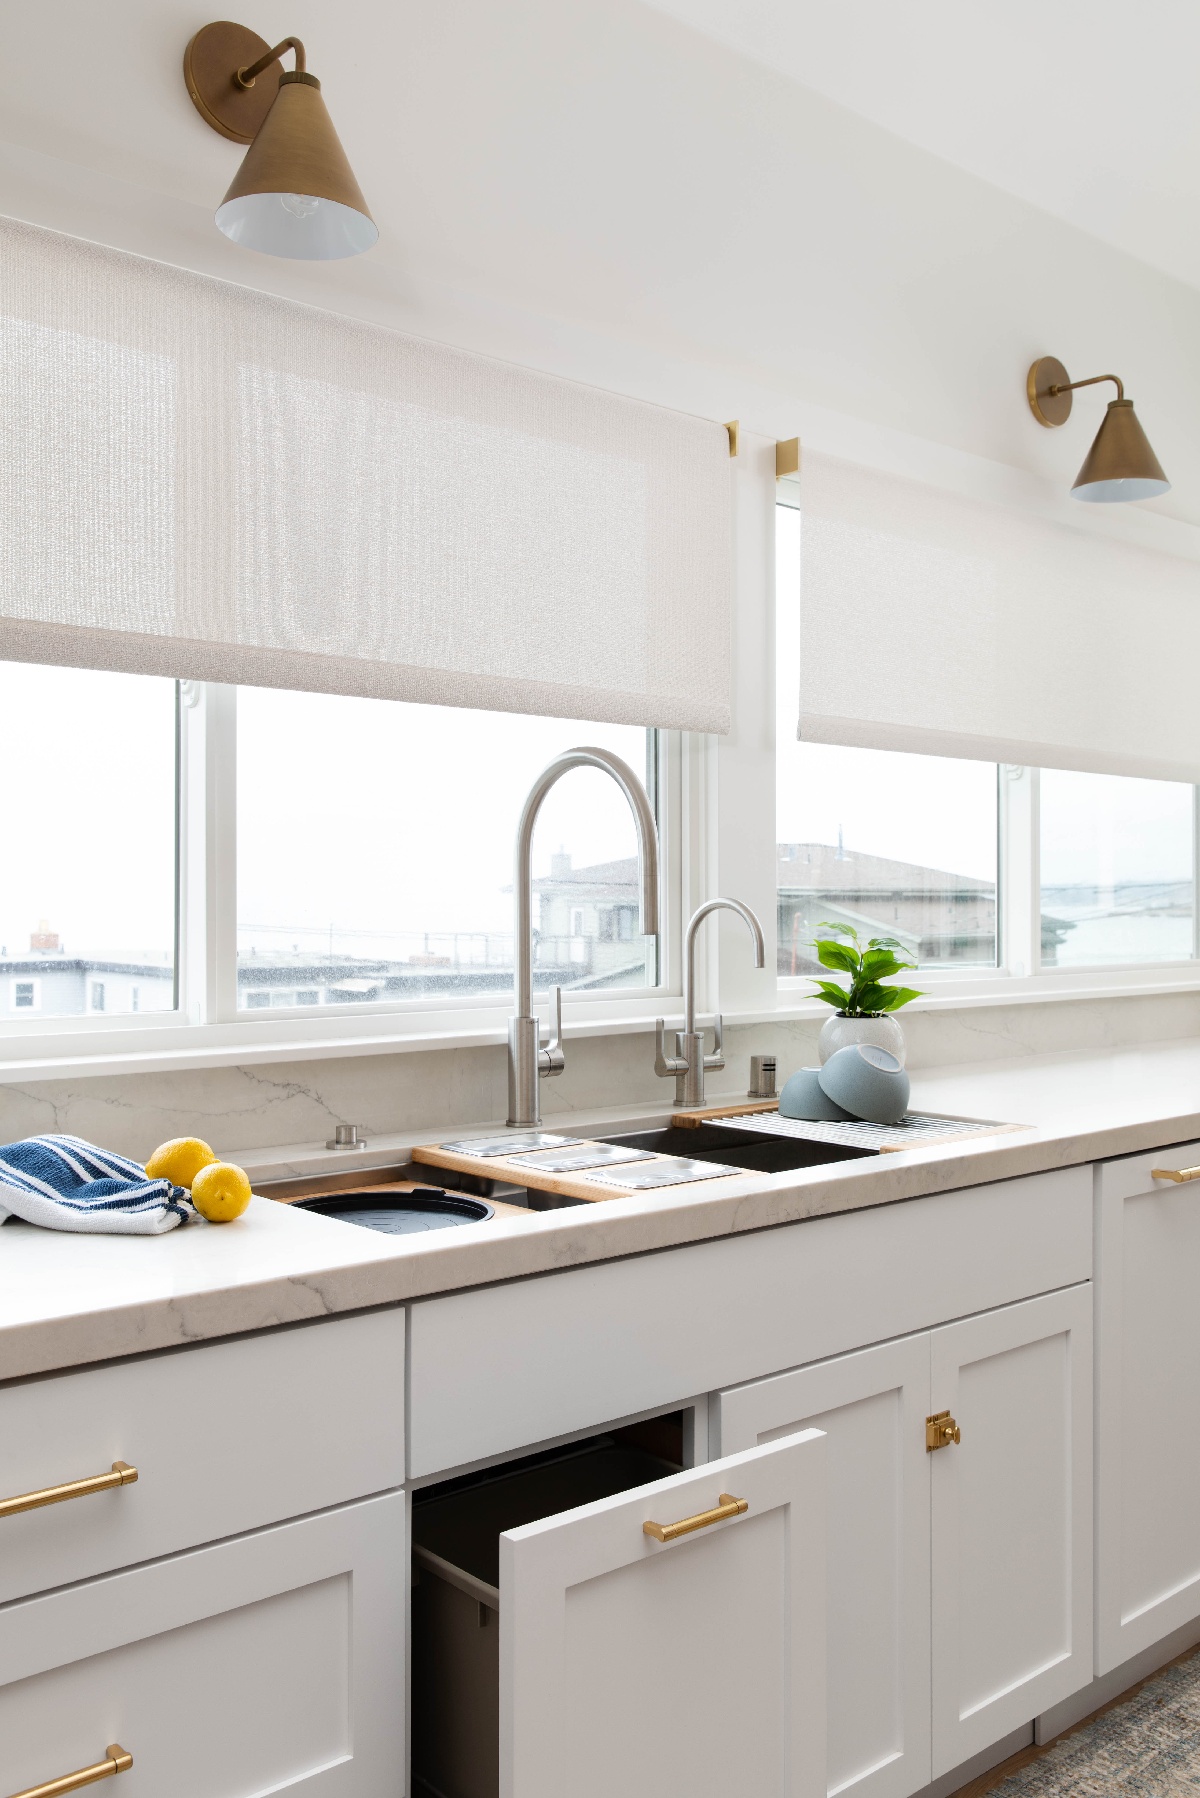 Kitchen sink with a double faucet and pull out garbage can with fabric blinds